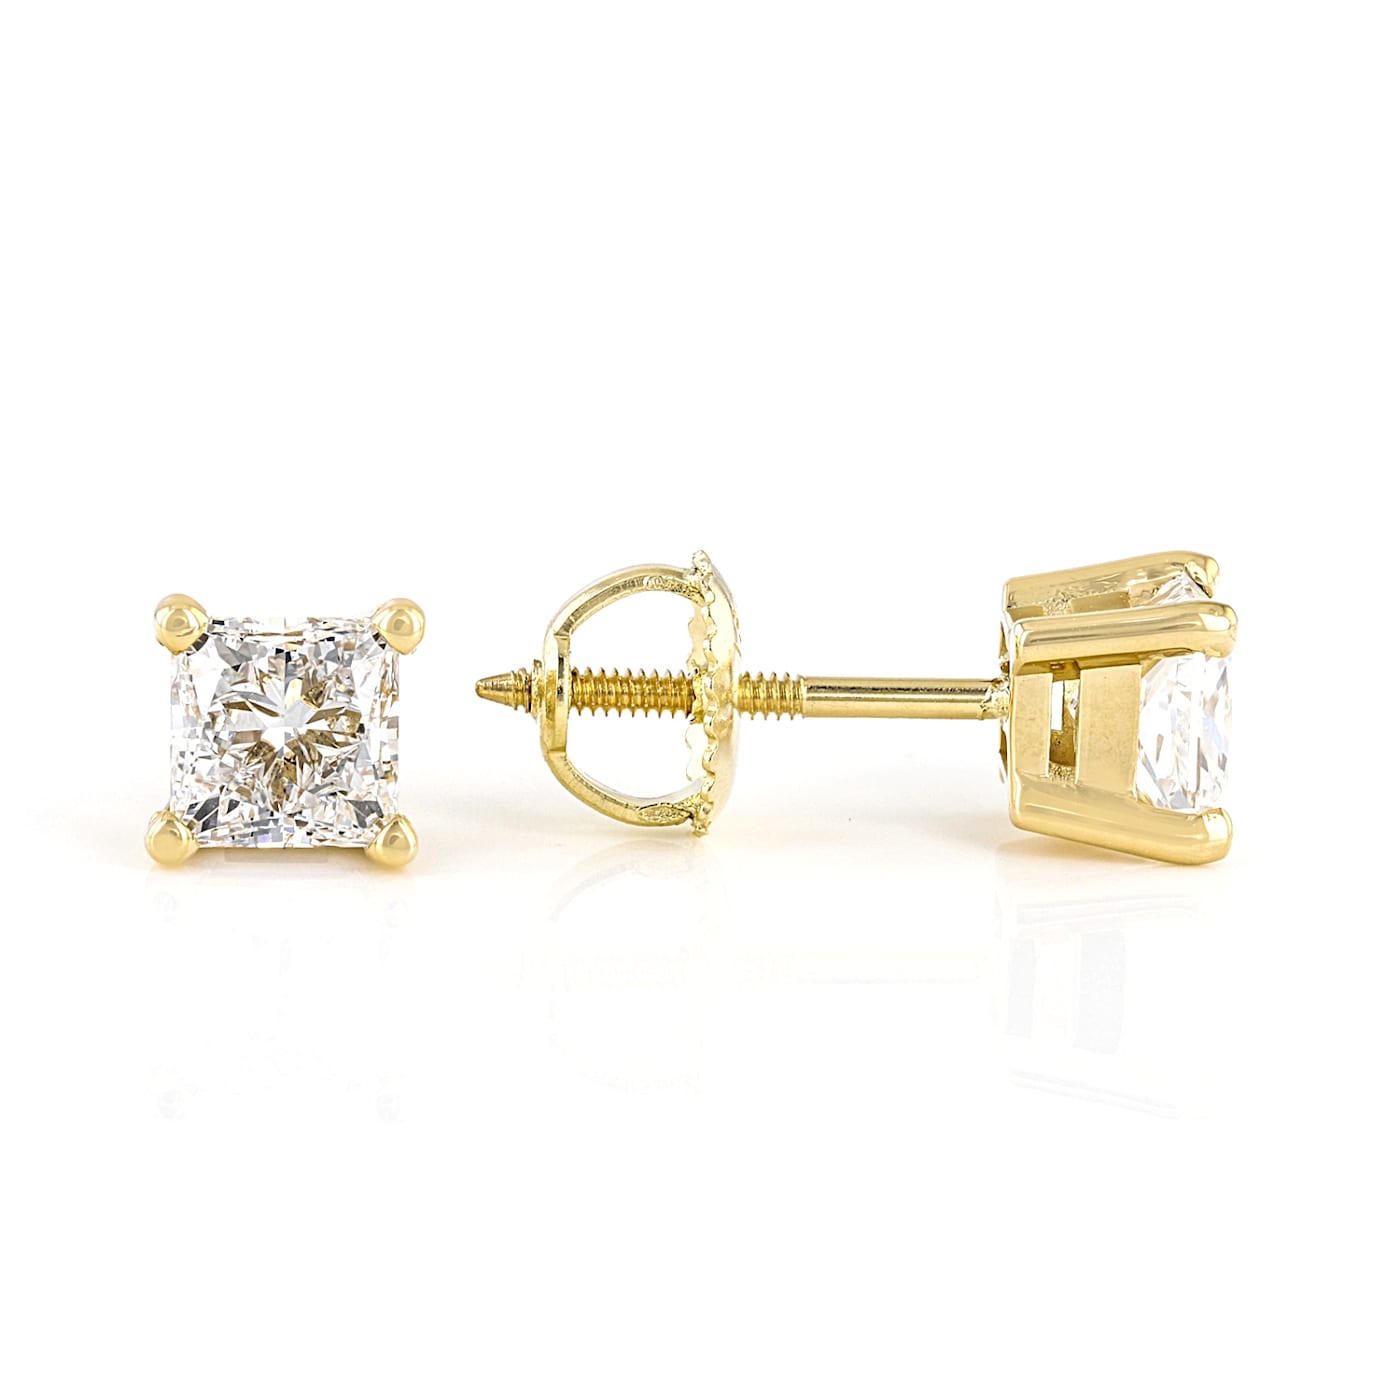 4.07 carat VS1 Fancy Light Yellow Matched Canary Diamond Stud Earrings (GIA  Certified, Yellow Gold) — Shreve, Crump & Low